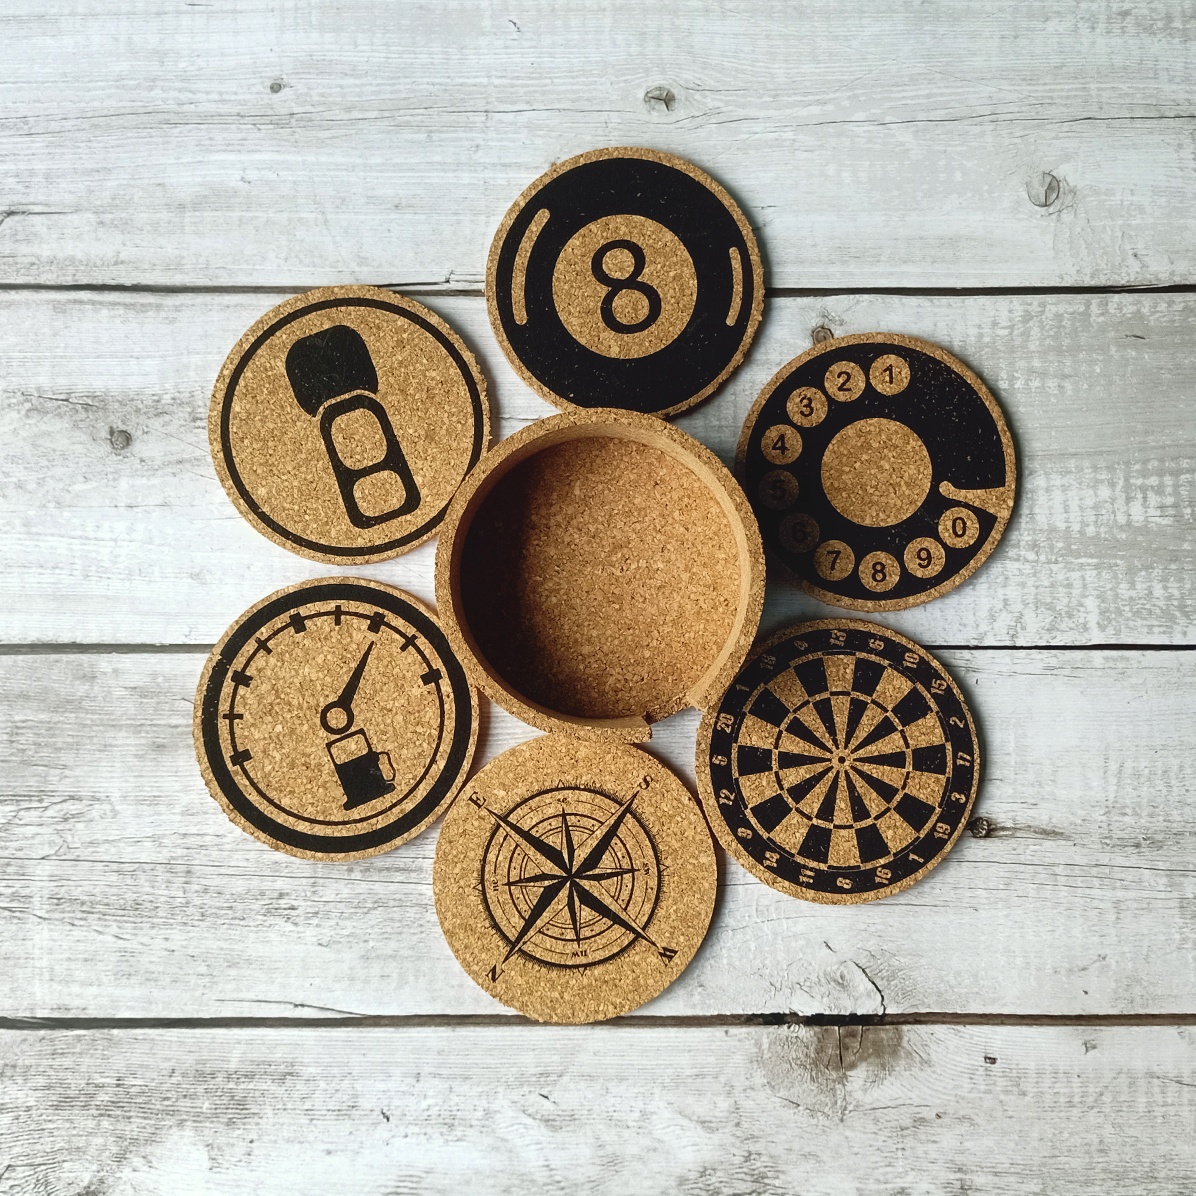 Beverage Coaster Custom Fashion Personalized Exquisite Ceramic Coasters with Cork Liner,4 Pieces Sets Brown Horse